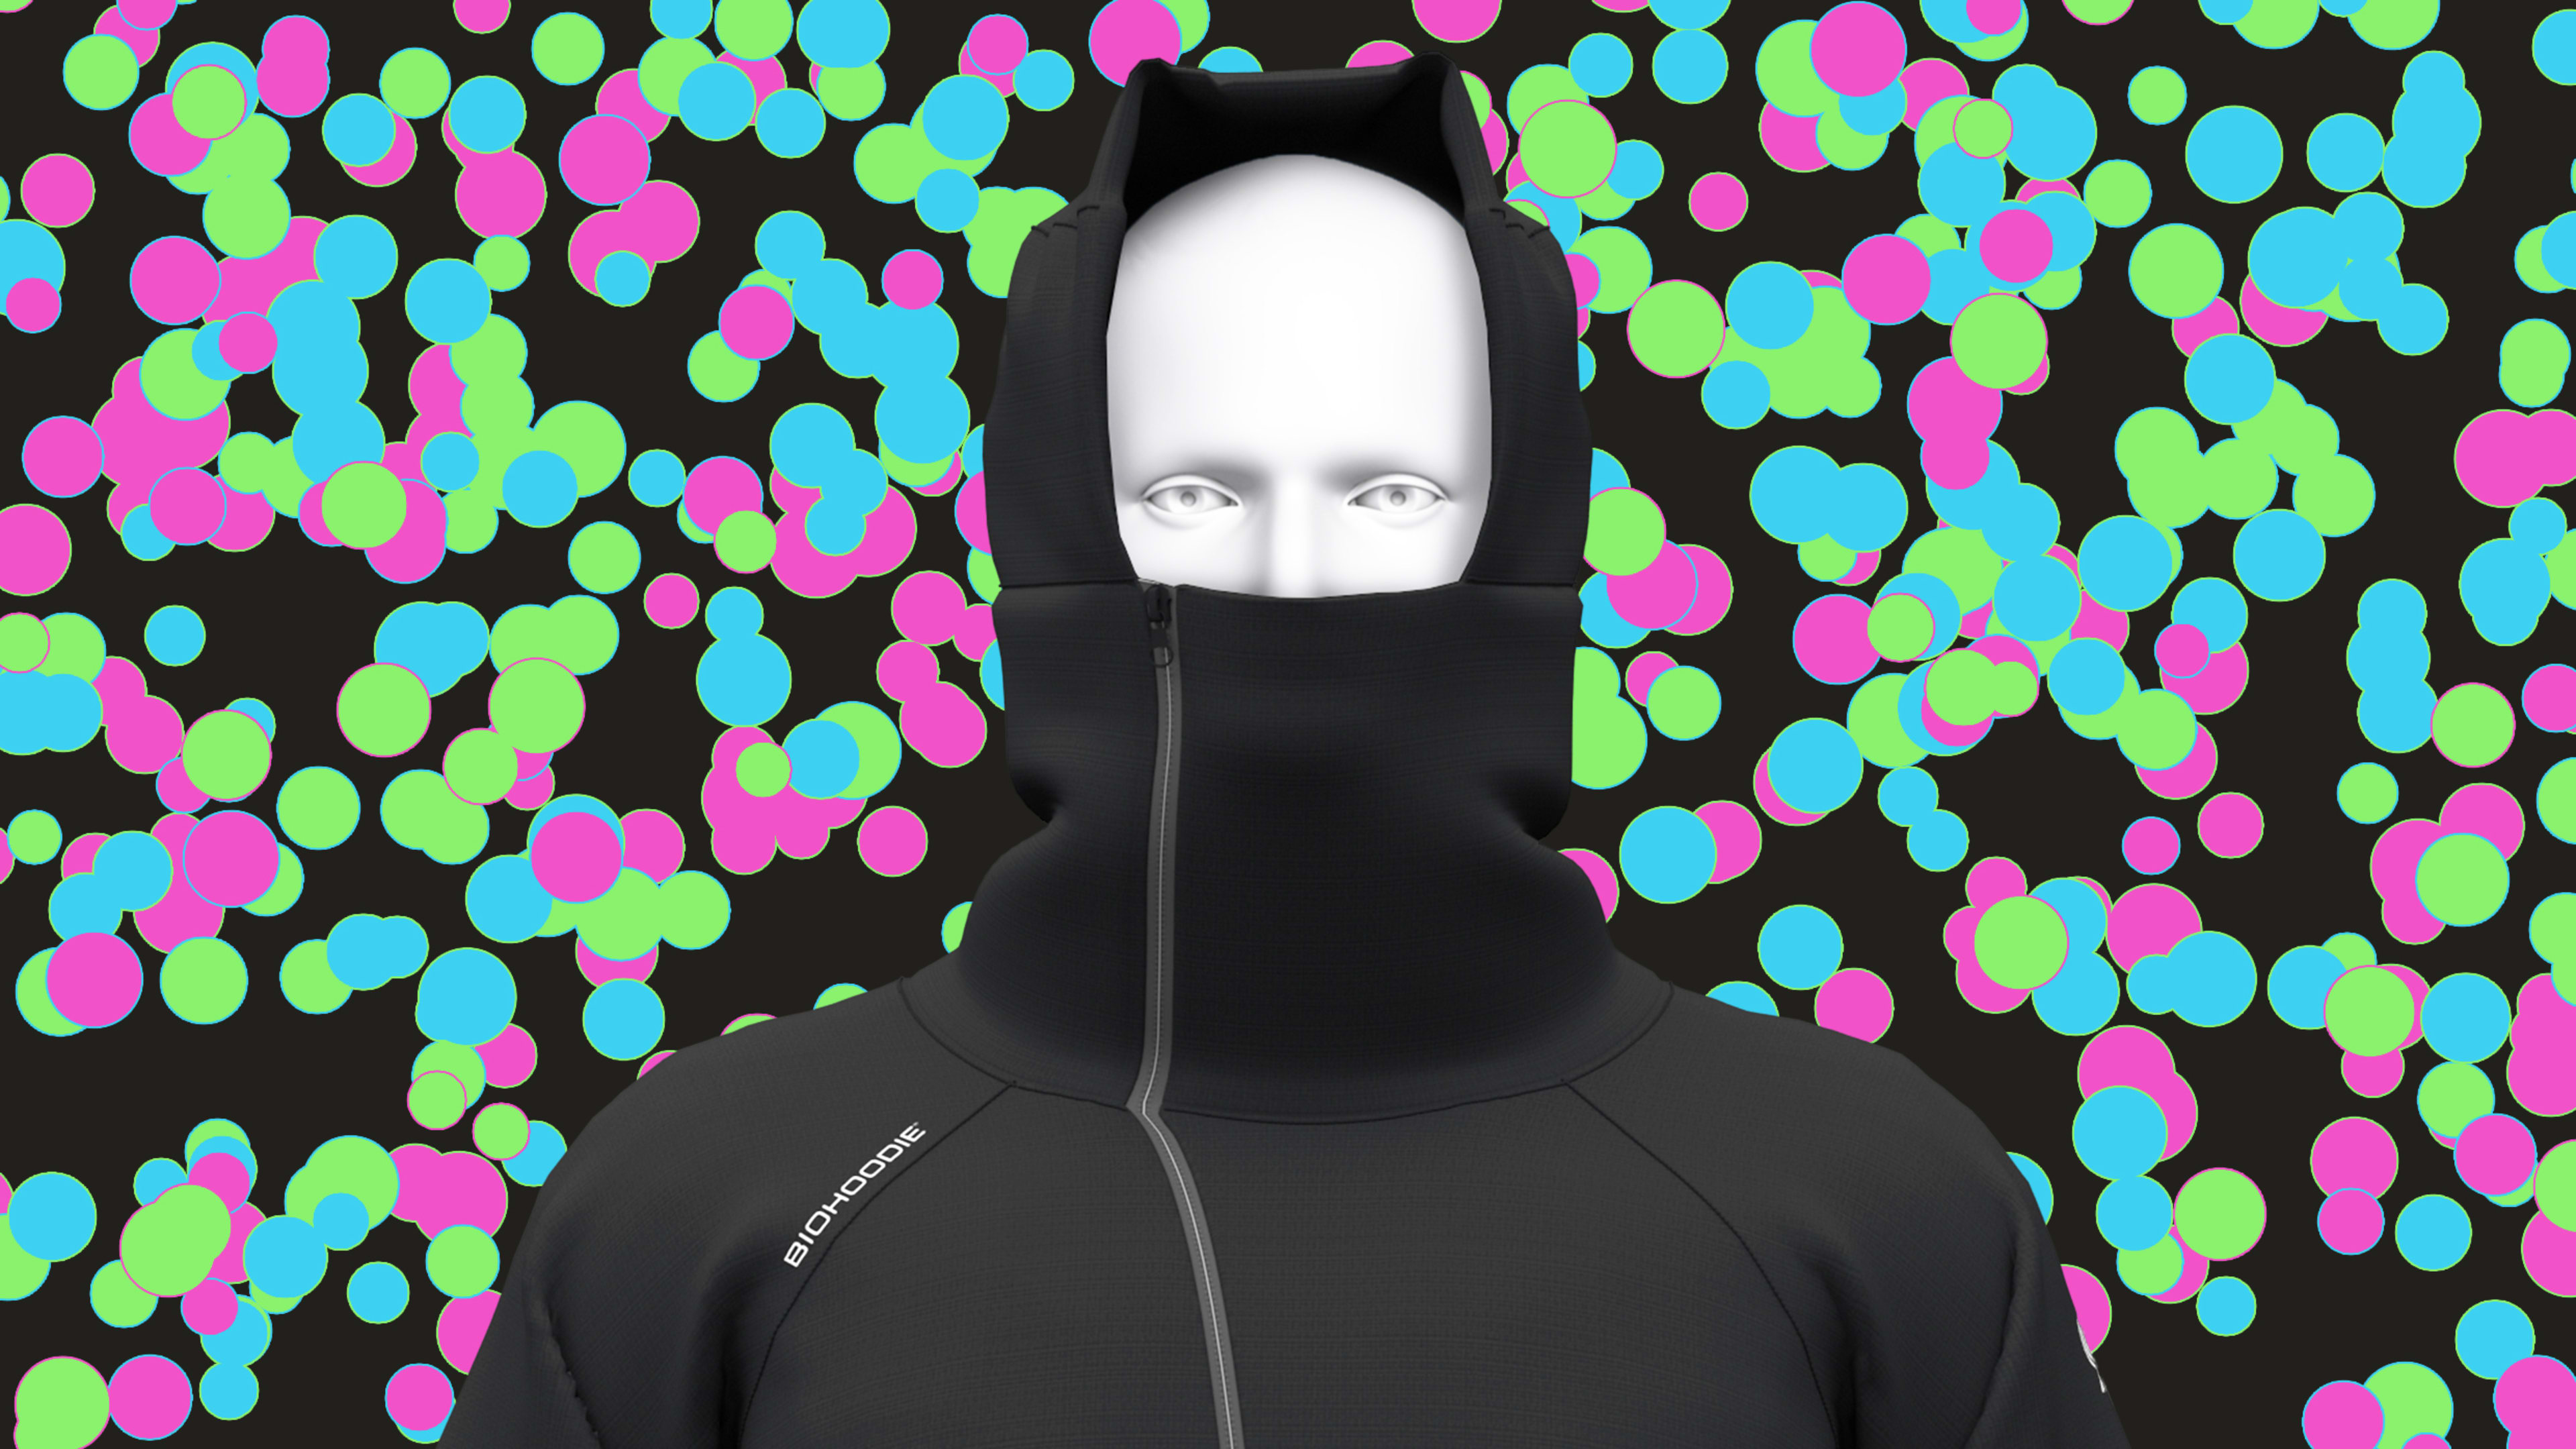 This hoodie comes with a built-in mask